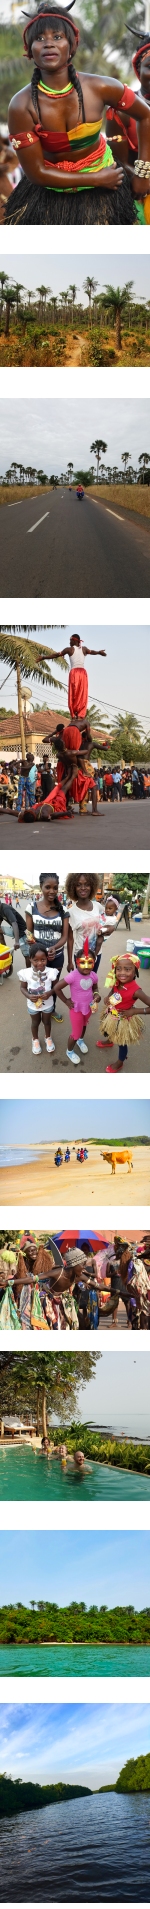 From Dakar to Carnival in Bissau on Scooters